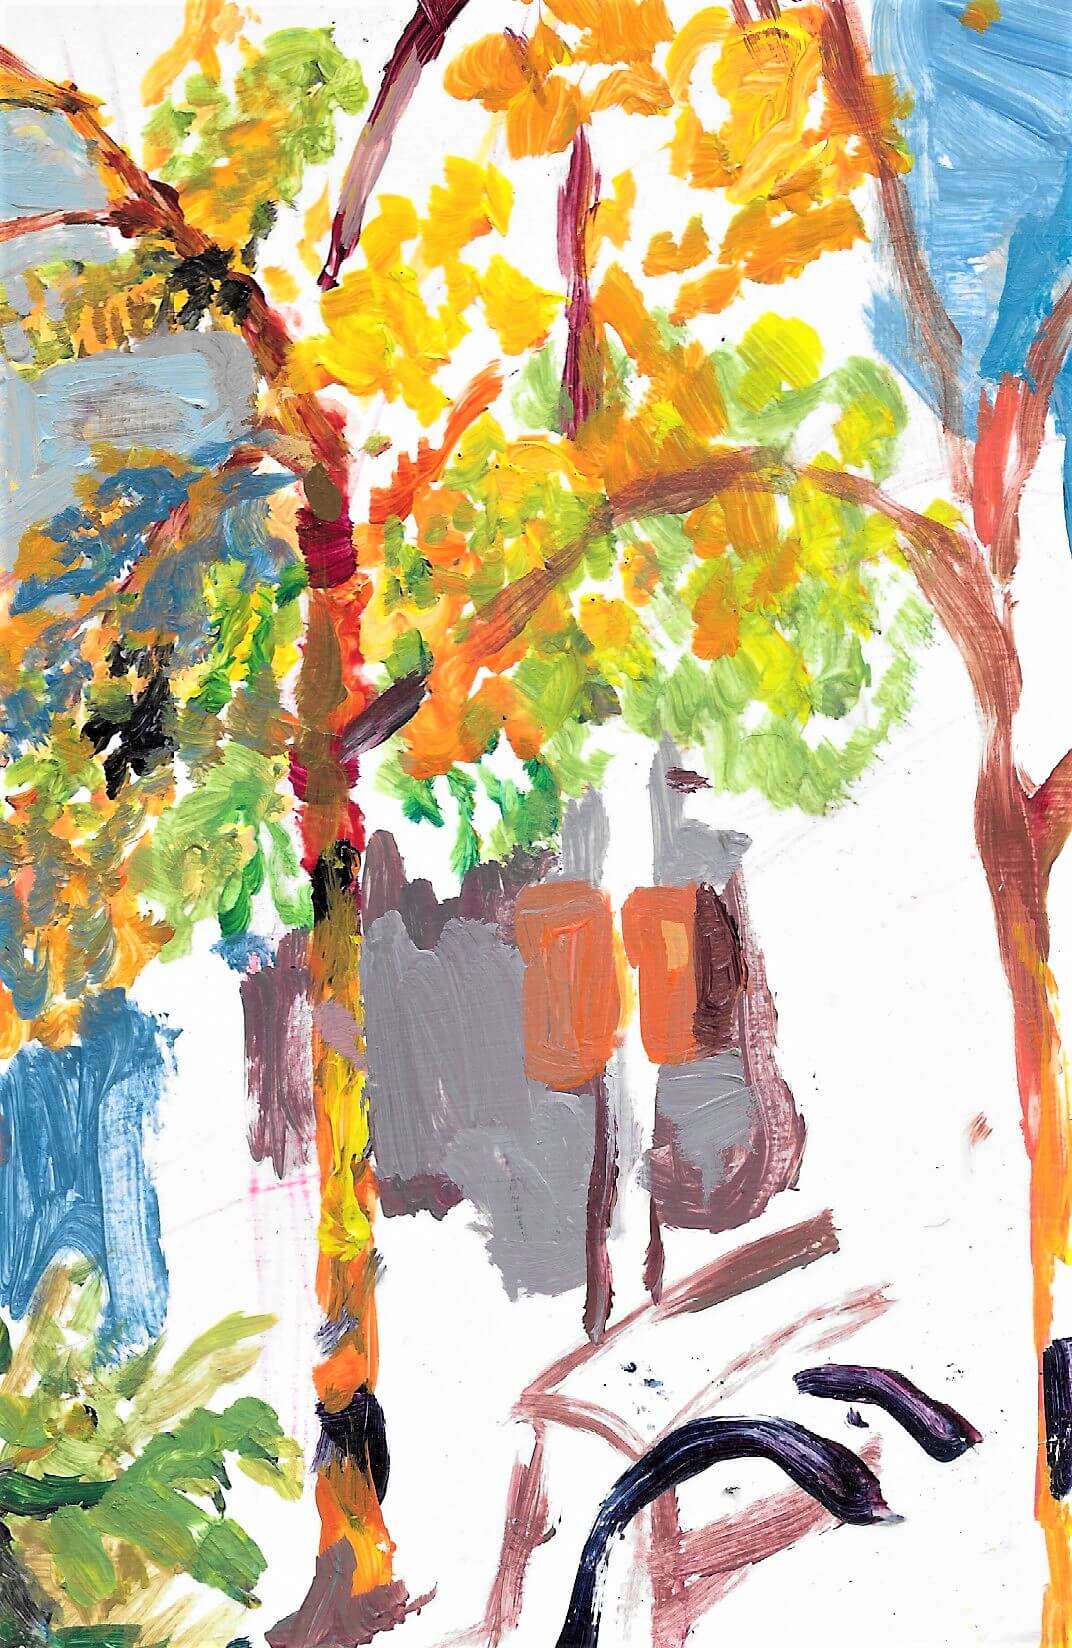 A colorful, roughly-brushed painting that features tree-like figures with orange and yellow leaves, and other items in gray and brown and blue that may refer to the built environment.